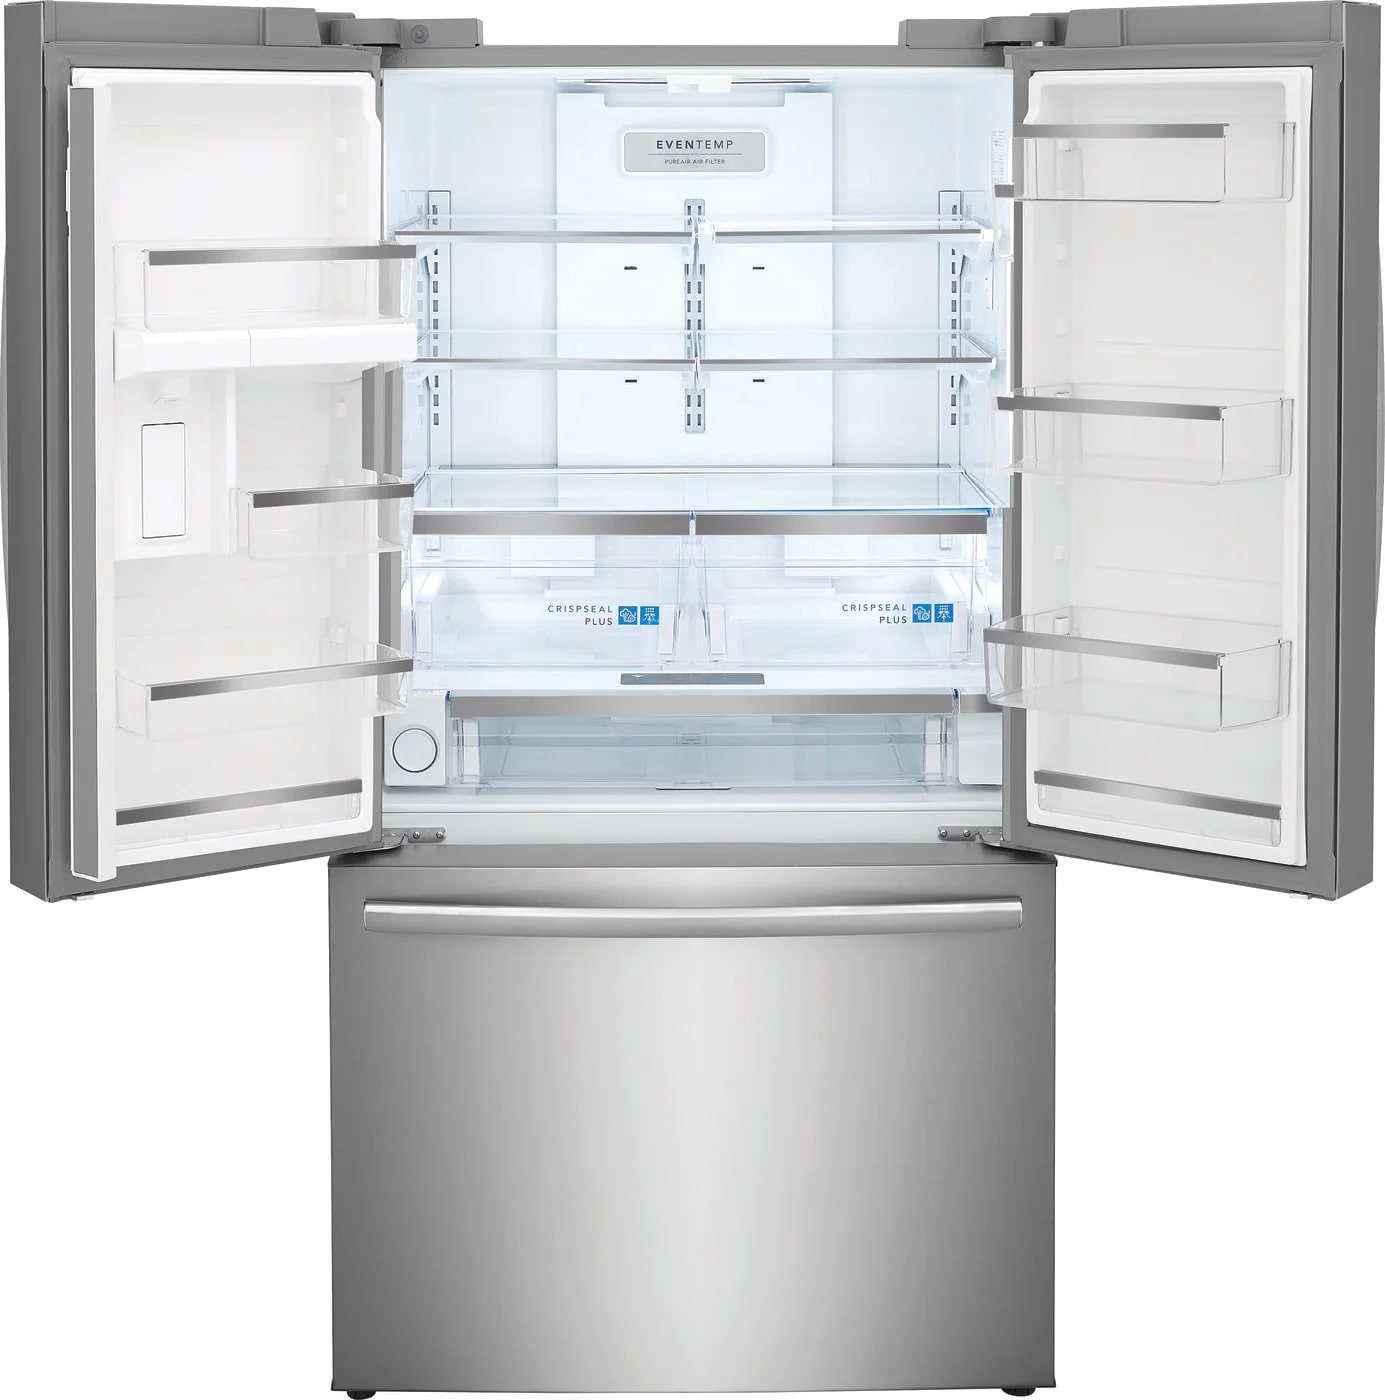 Frigidaire Gallery - 36 Inch 23.3 cu. ft French Door Refrigerator in Stainless - GRFG2353AF